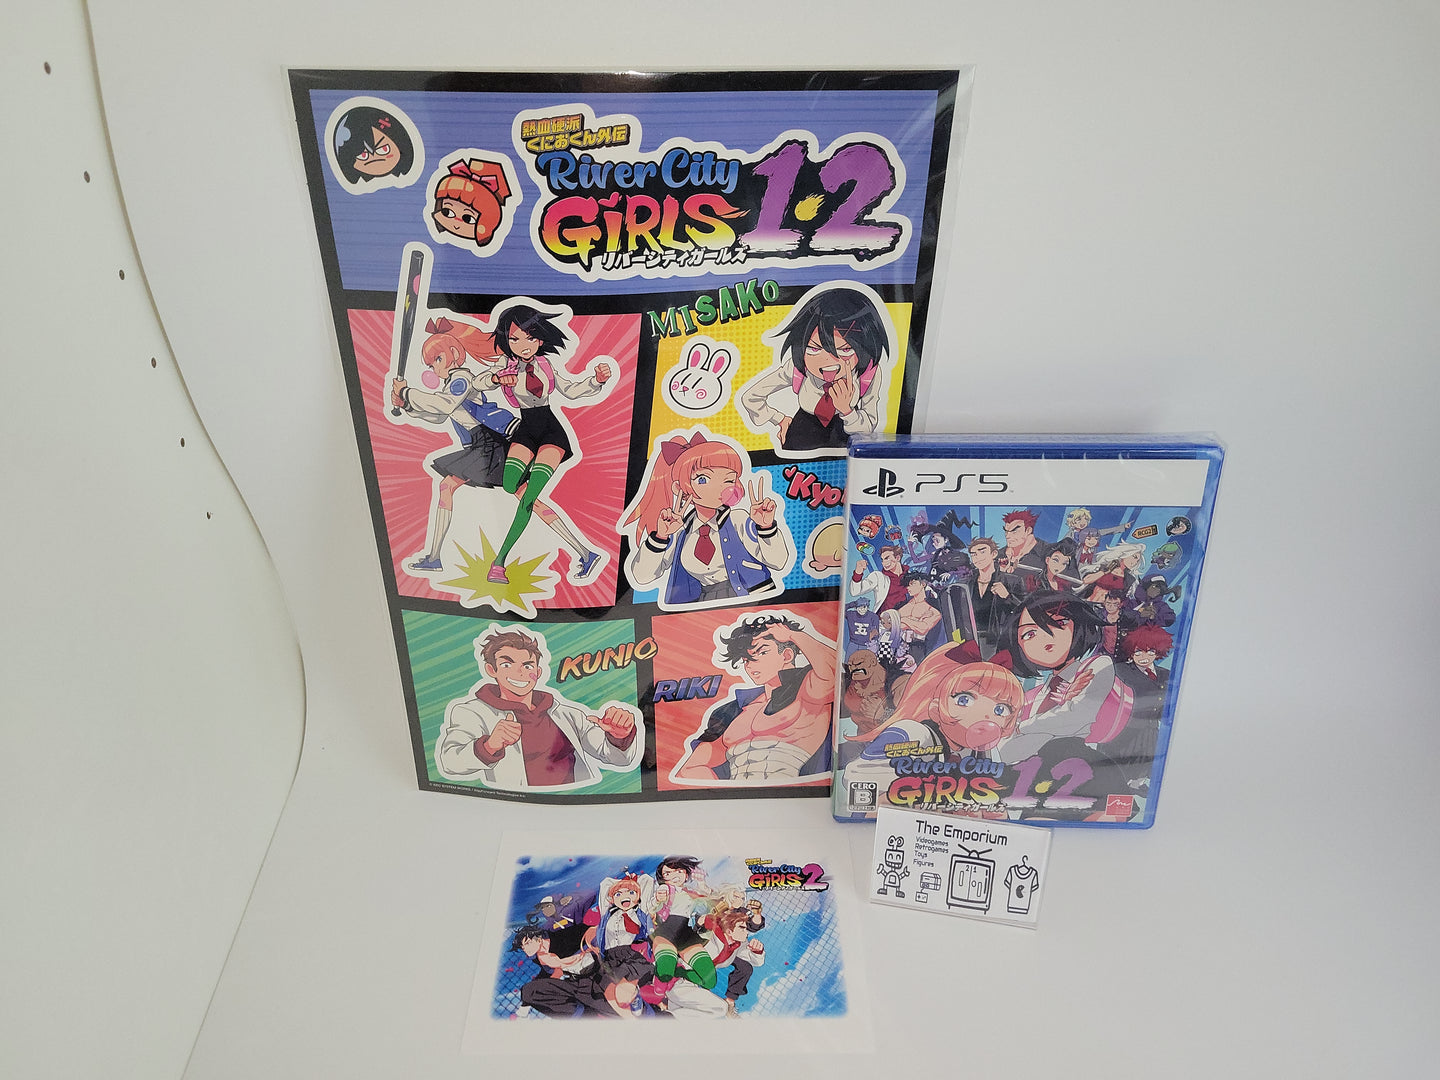 River City Girls 1 & 2 - Sony PS5 Playstation 5